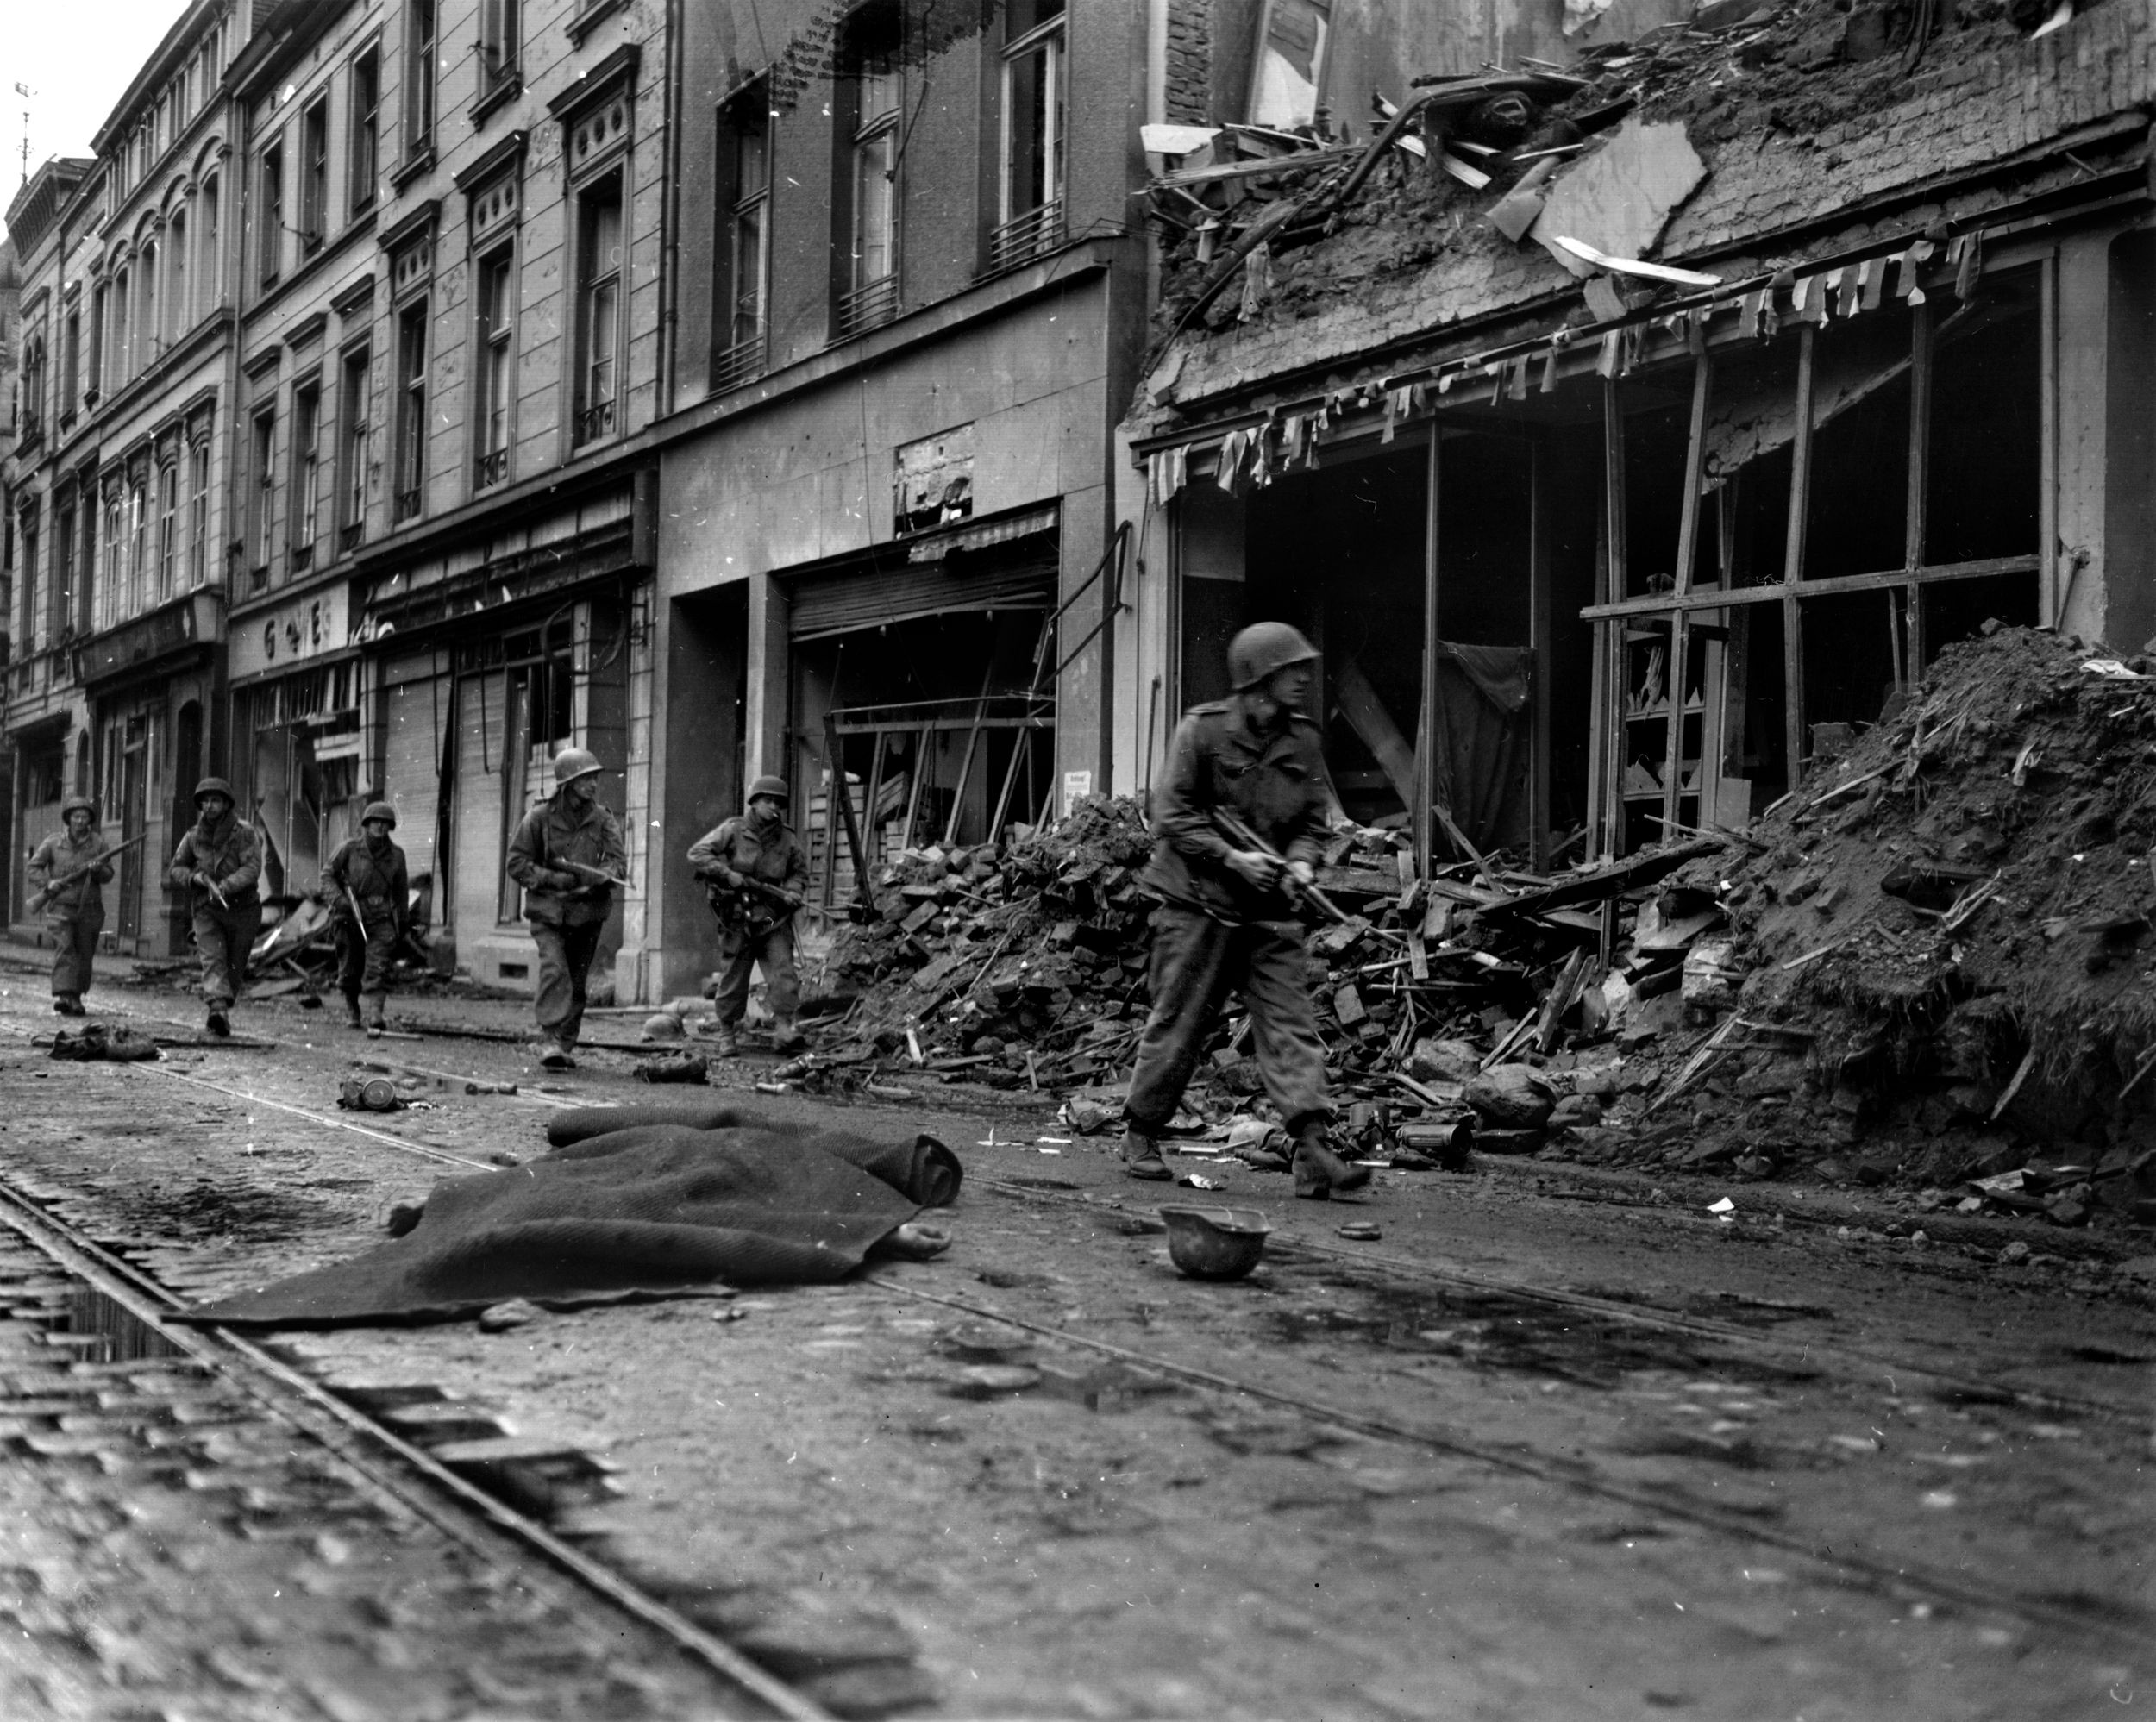 Now bloodied and thoroughly battle-tested, wary 1st Division members advance through the rubble of Bonn, Germany, on March 9, 1945. 